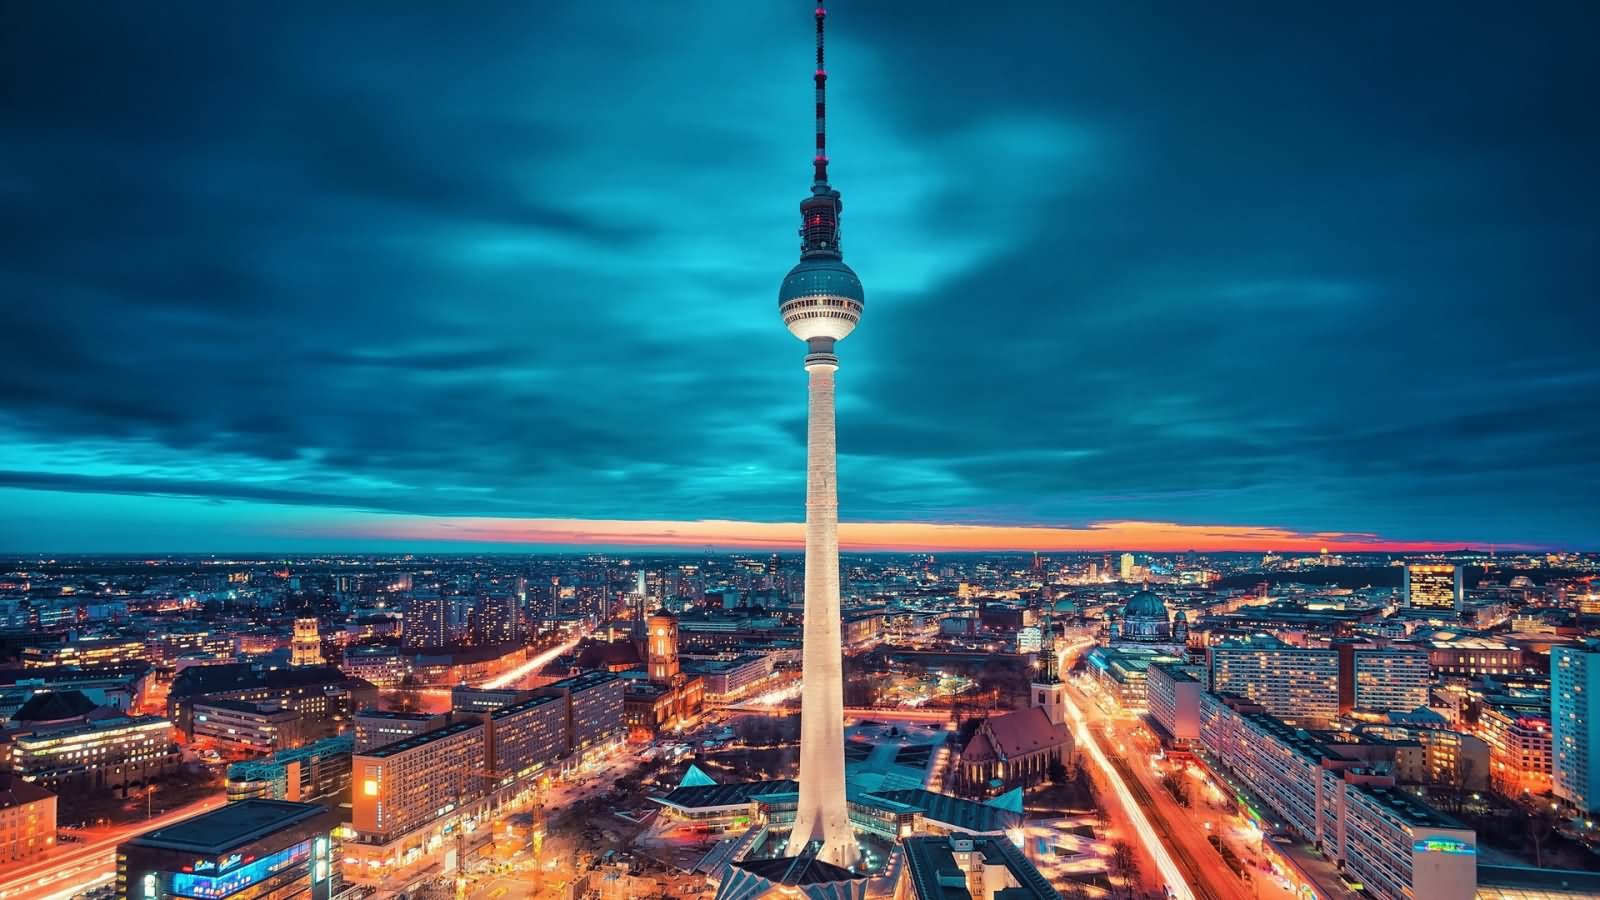 The Fernsehturm Berlin Tower With Twilight